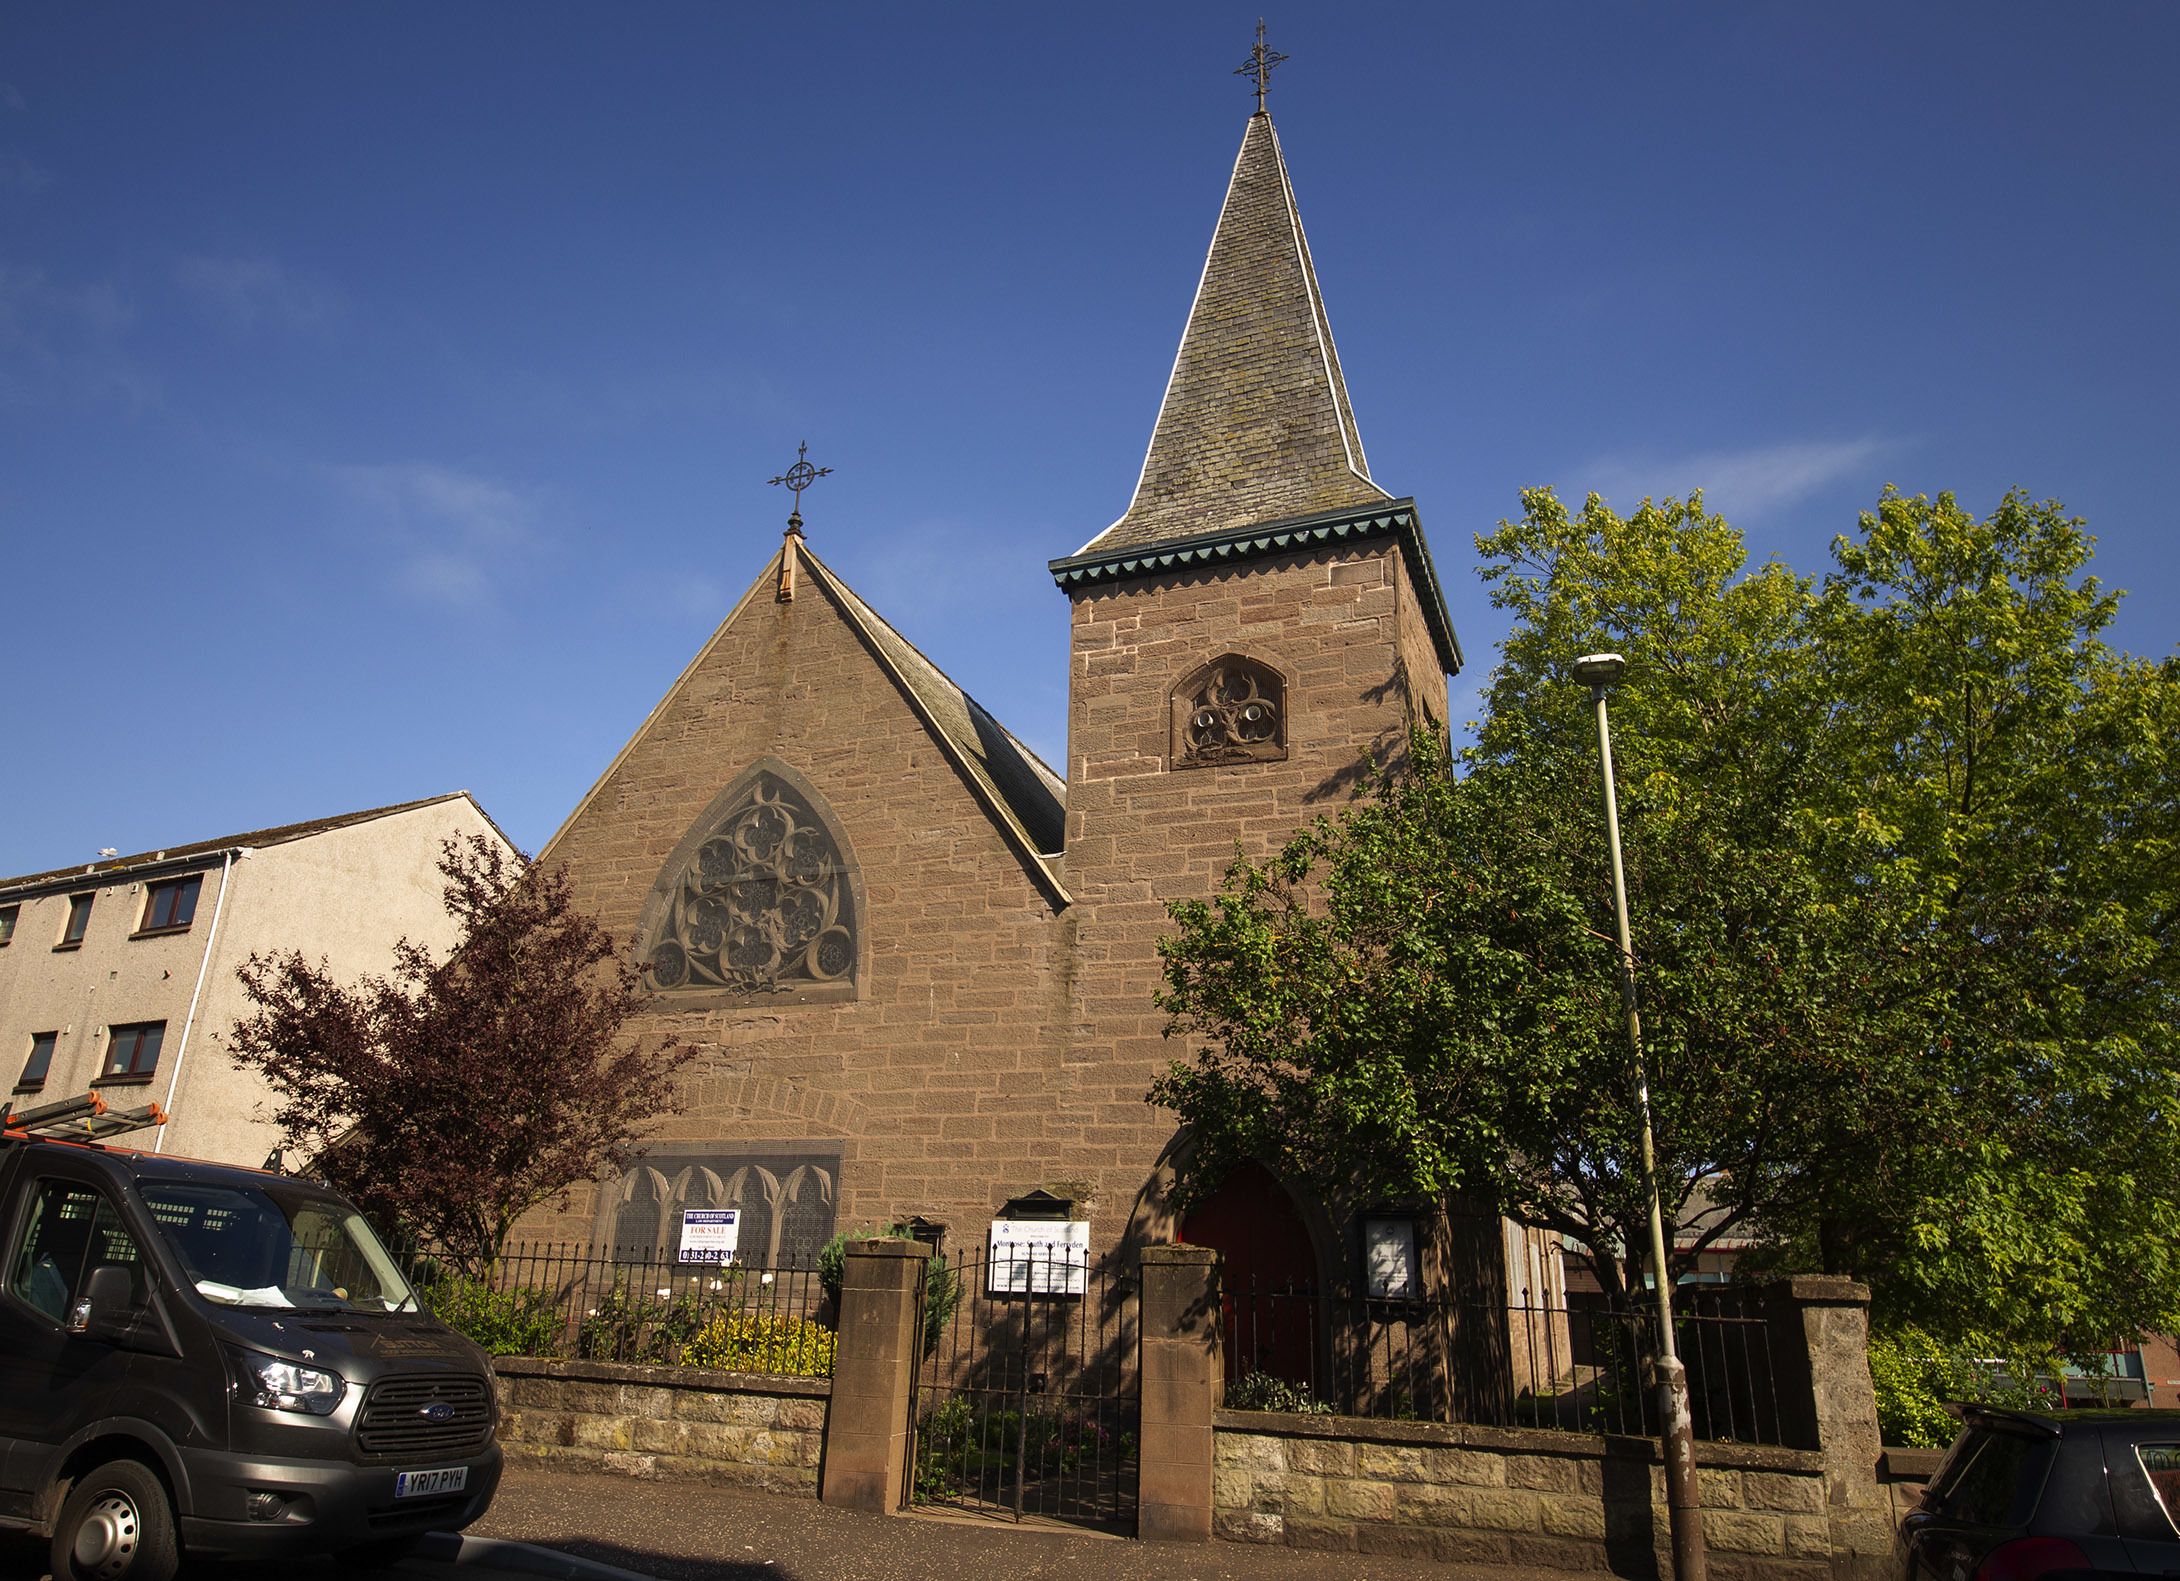 Properties on the market include Melville South Church in Montrose which was constructed in 1861 and is a category C listed building.